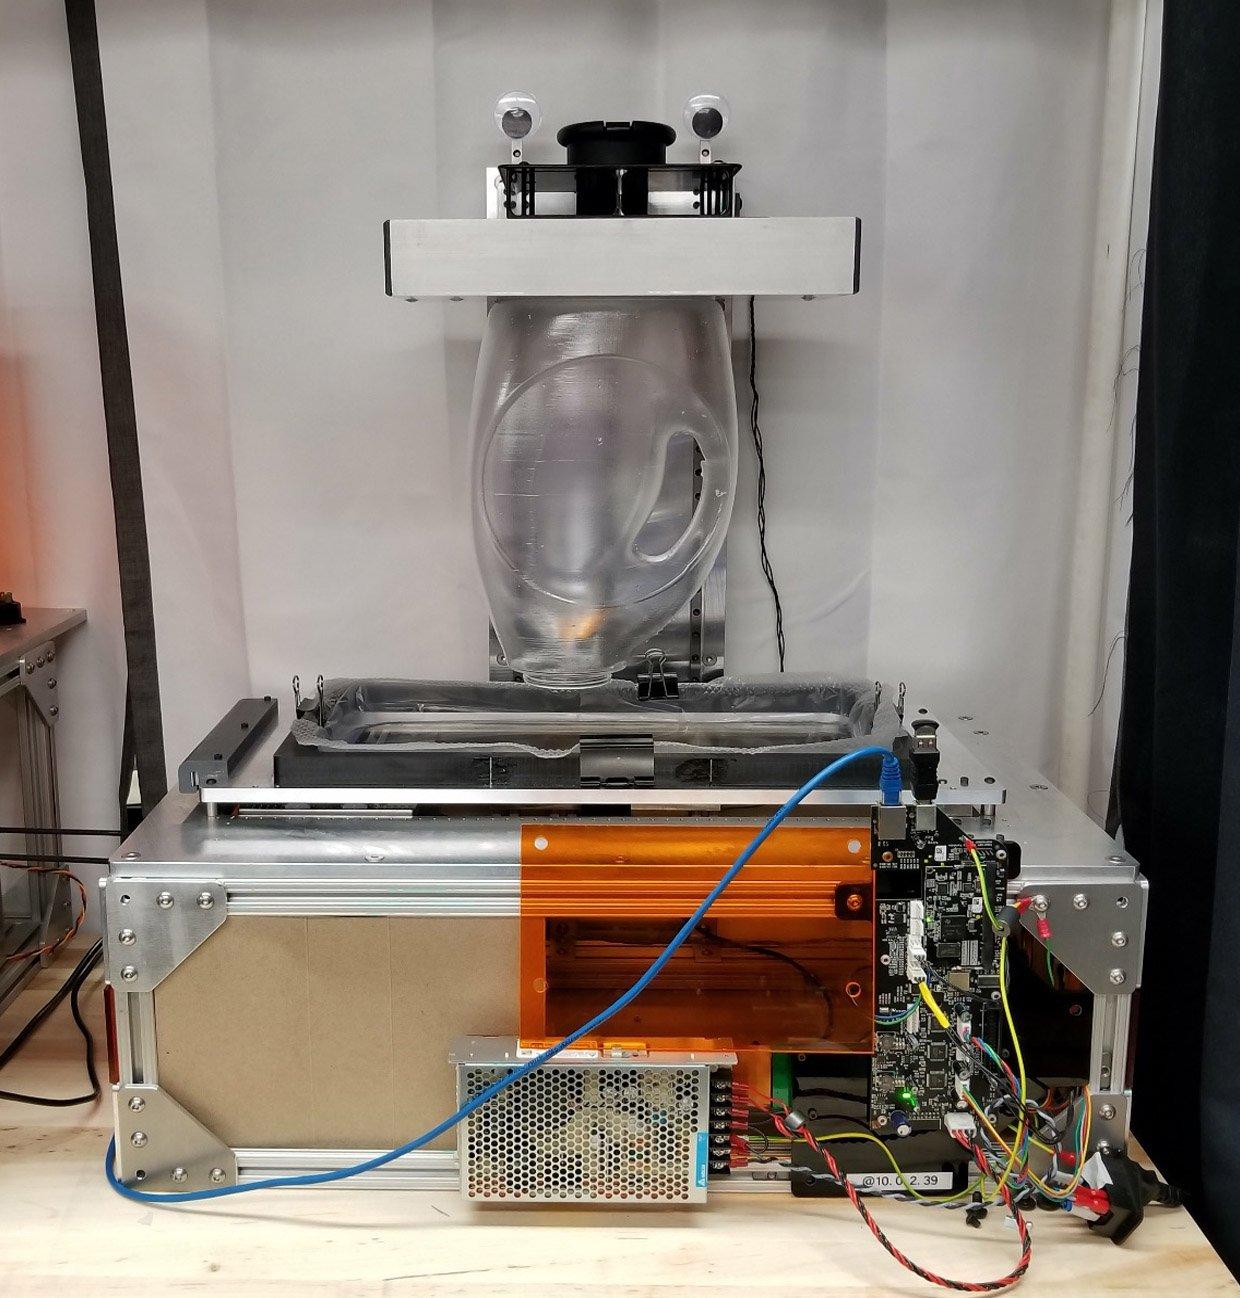 Early works-like prototypes of the Form 3L large-format SLA 3D printer.